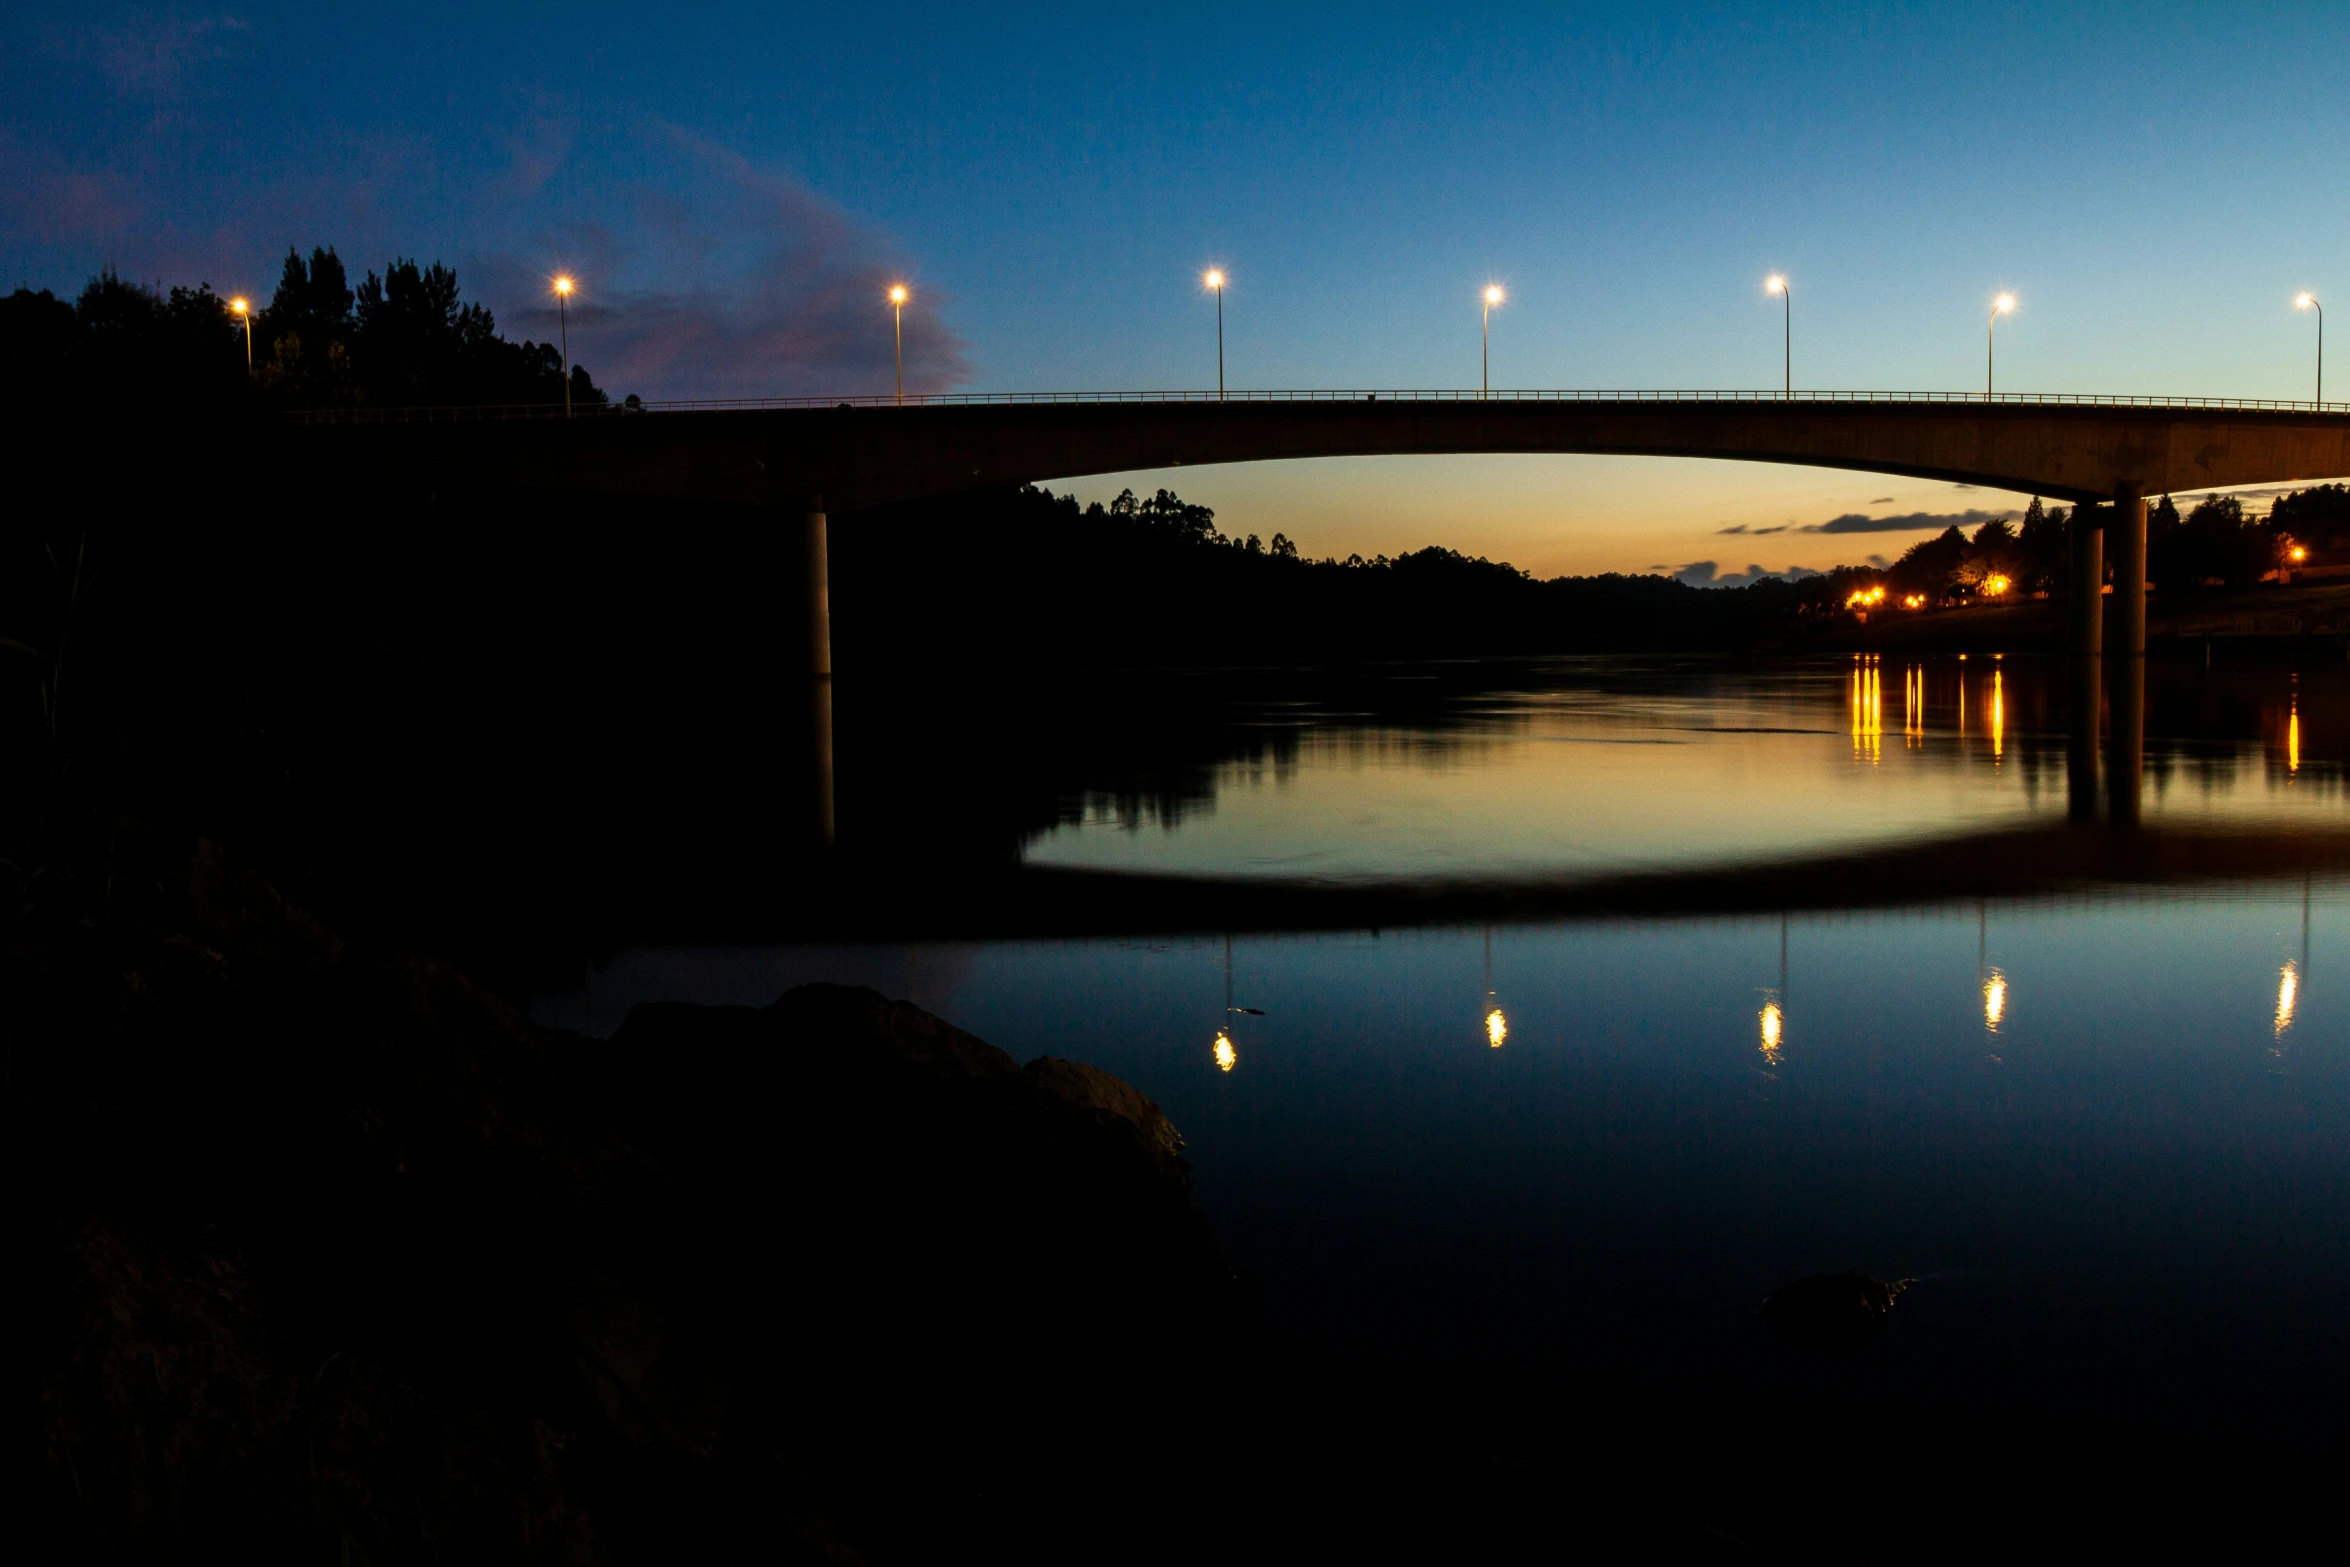 a bridge is lit up over the water